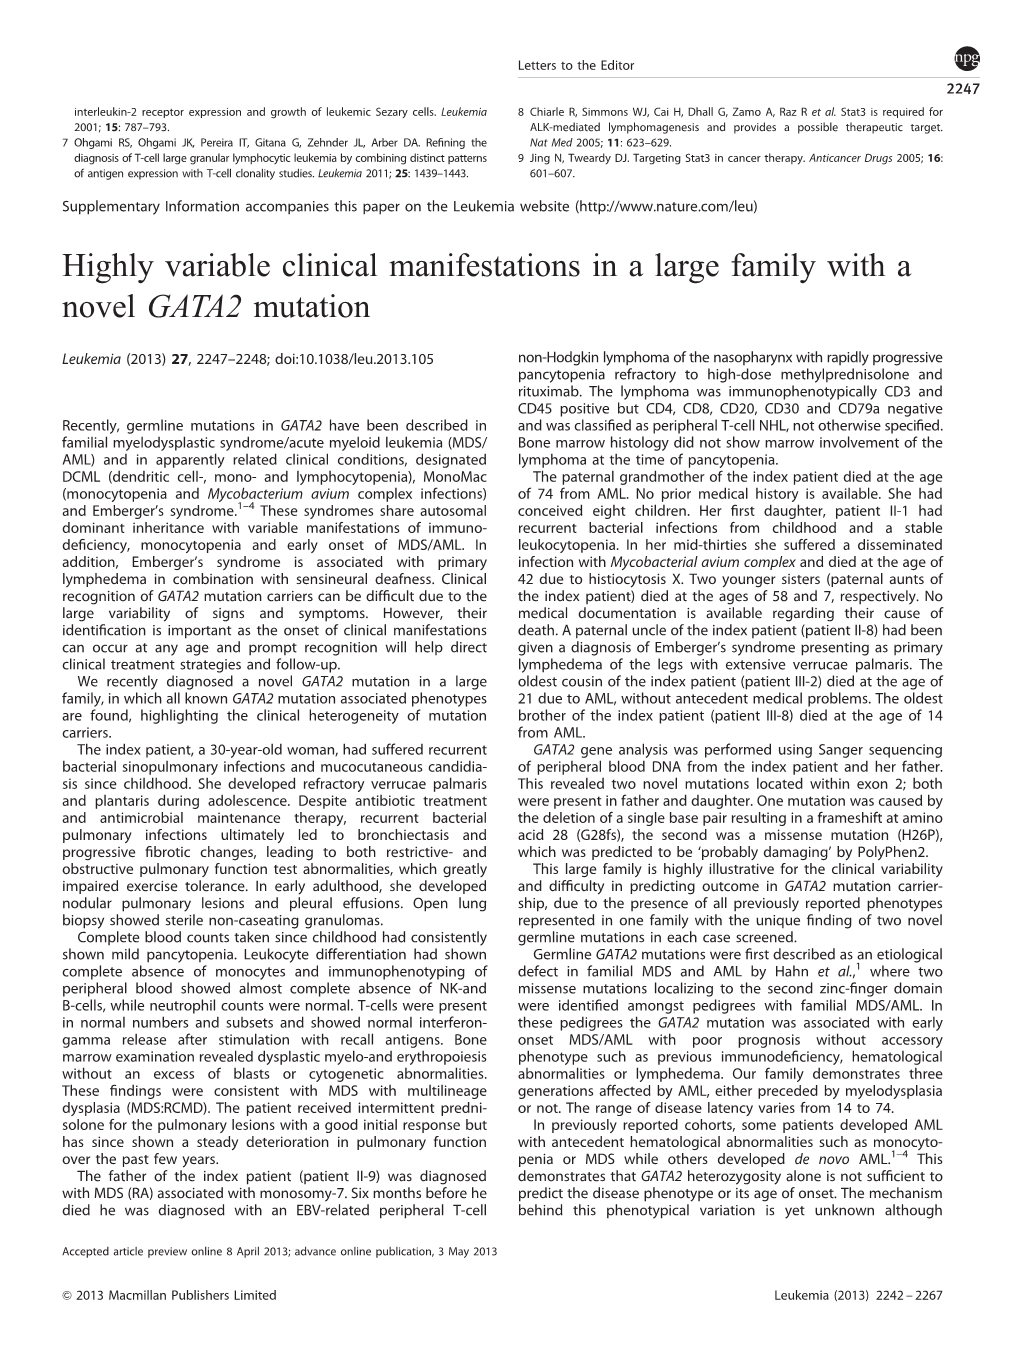 Highly Variable Clinical Manifestations in a Large Family with a Novel GATA2 Mutation